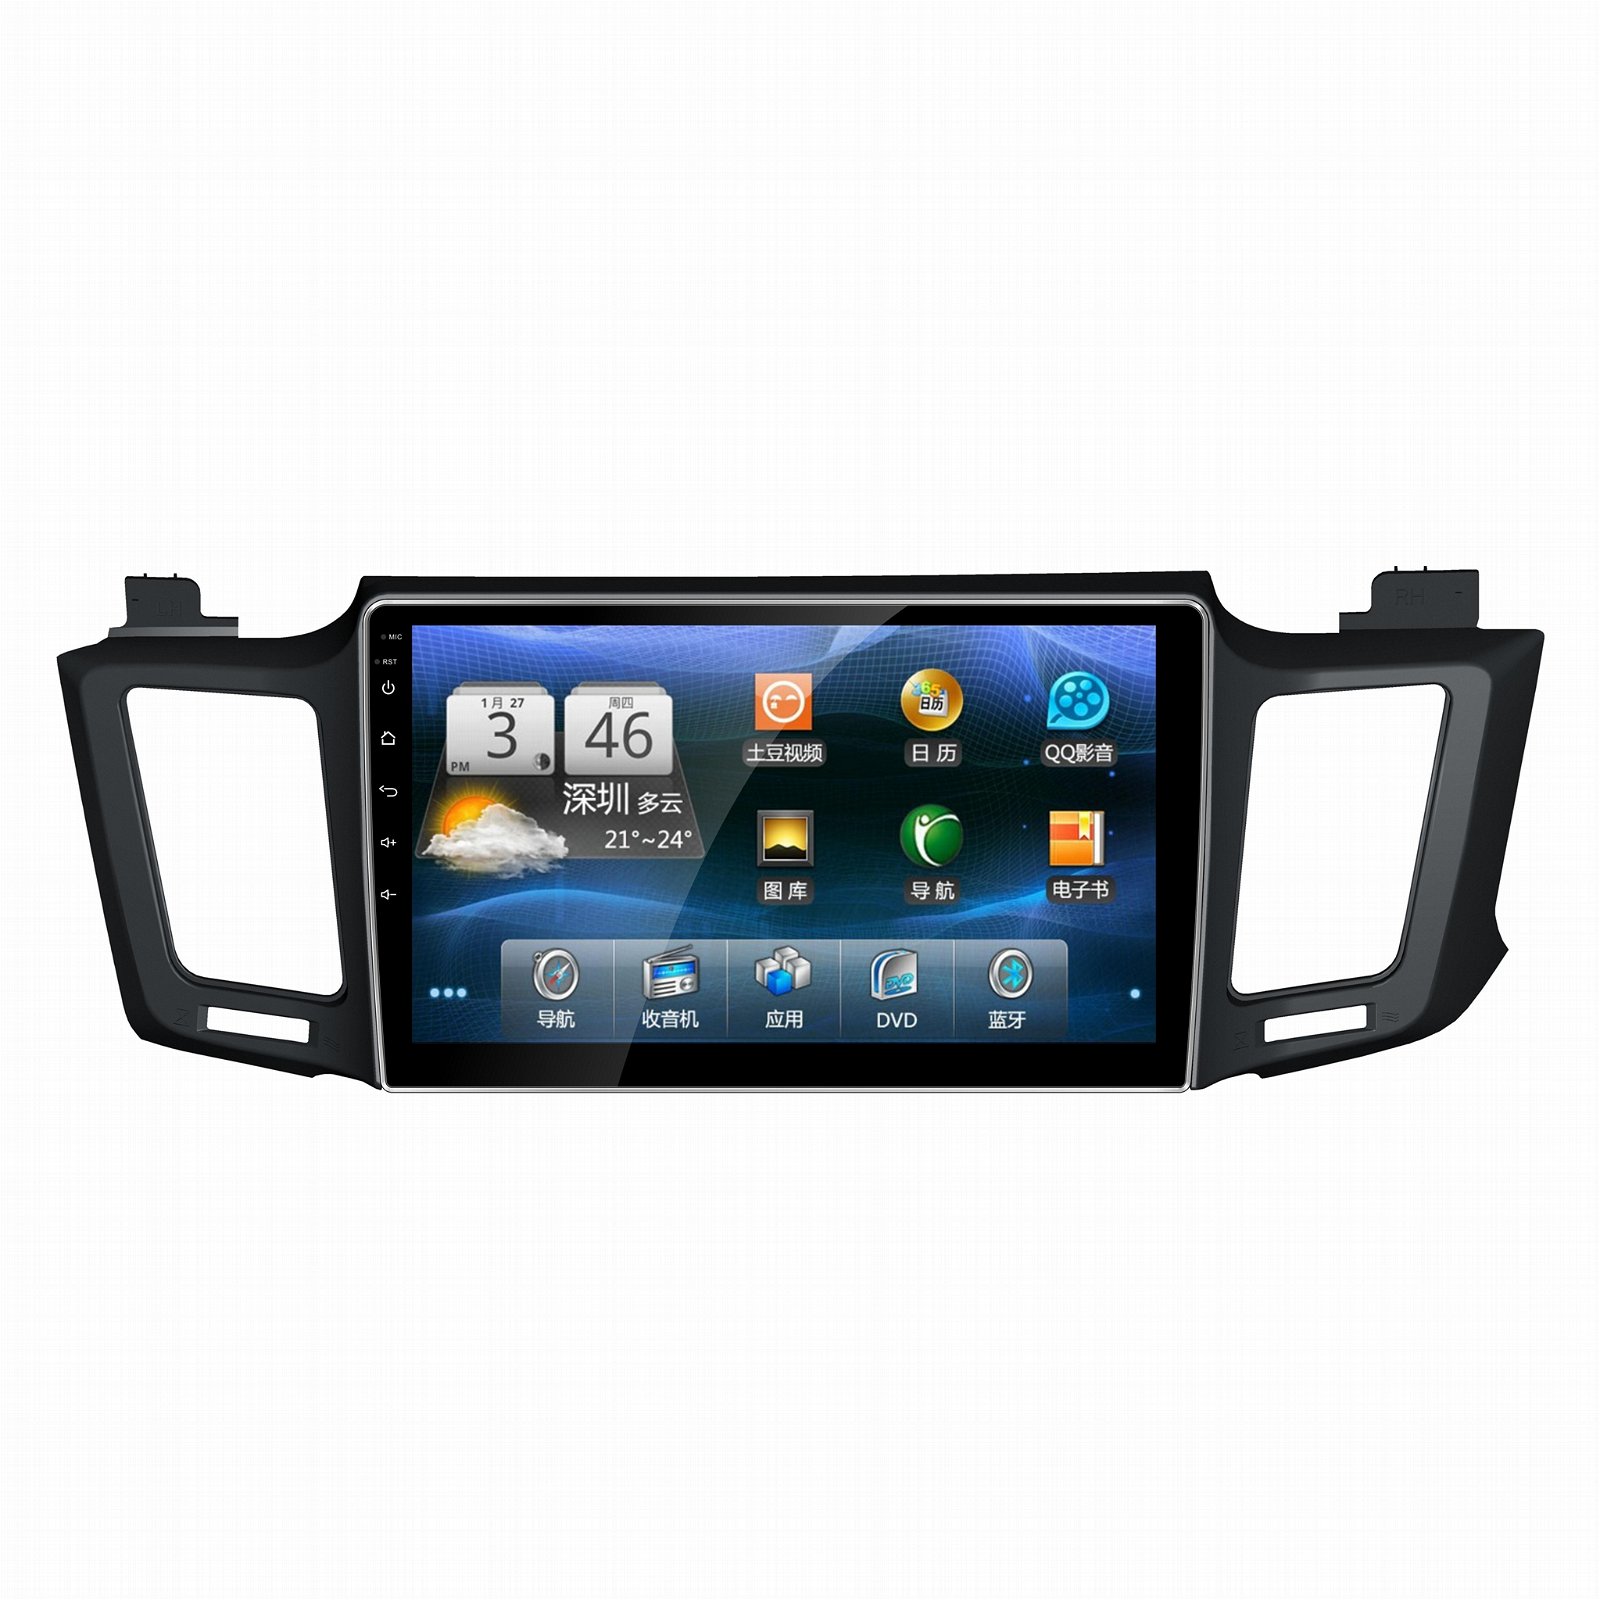  For Toyota RAV4  10.1 inch Android 6.0 car dvd player car radio wifi 4G